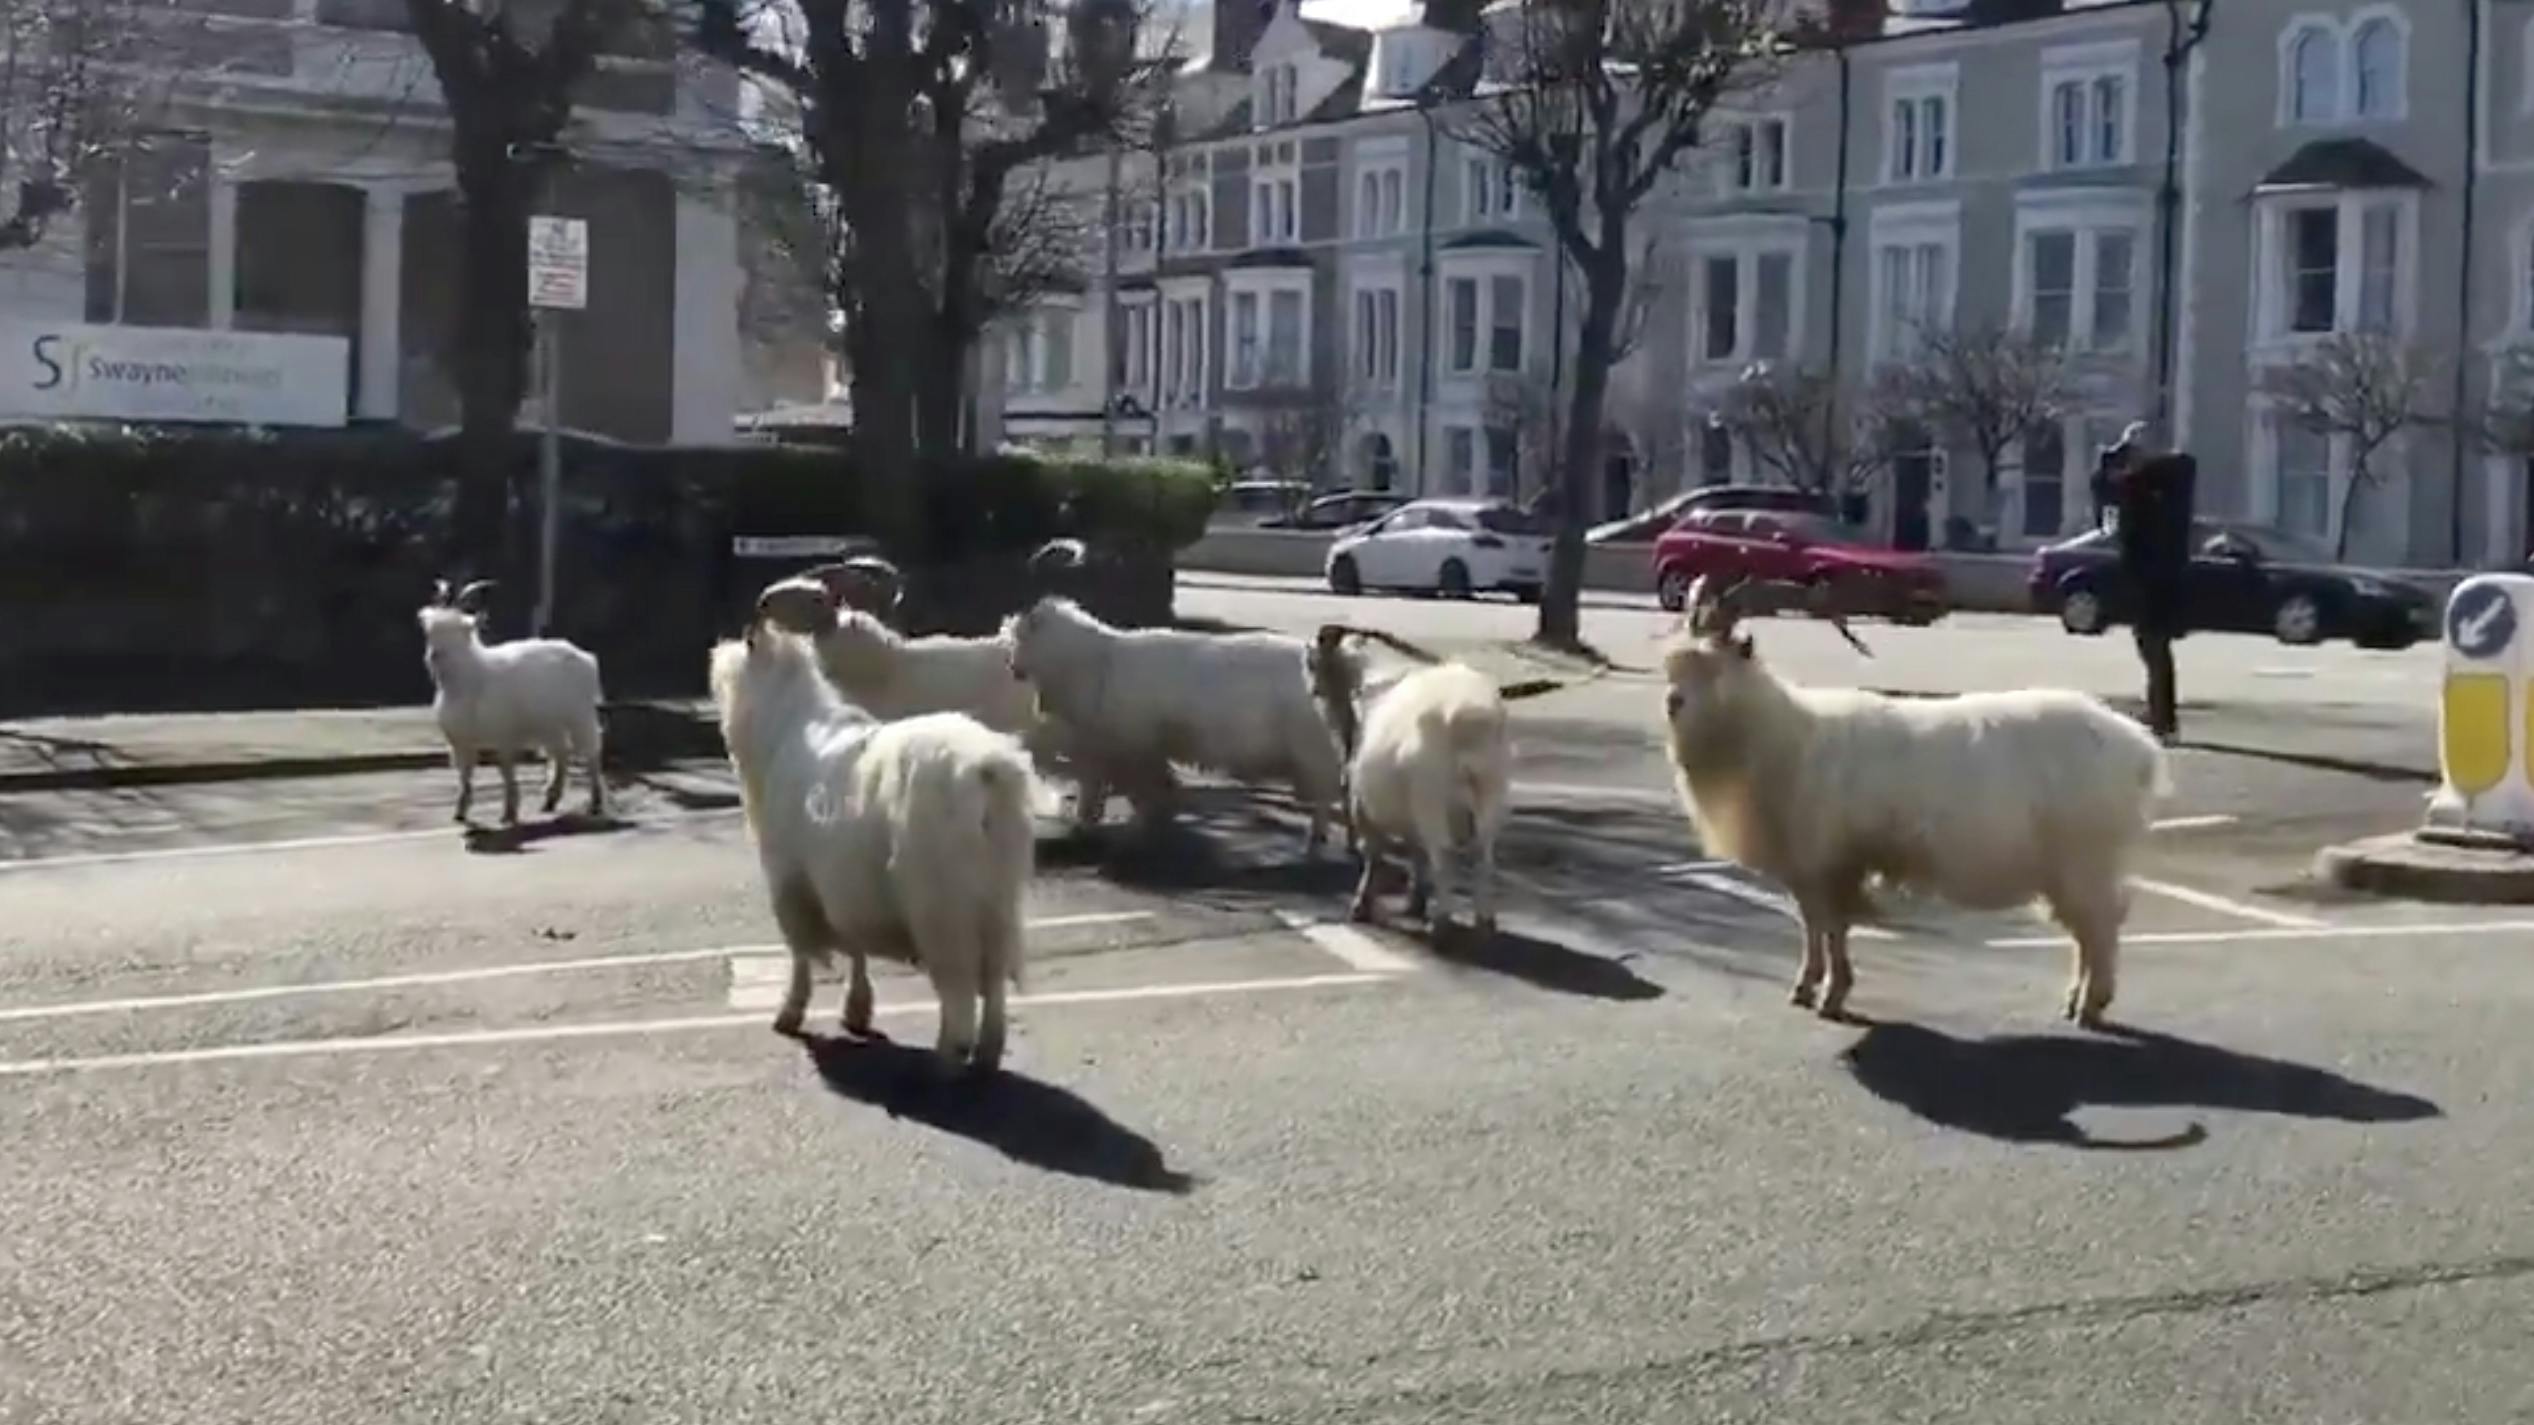 Satanic-Looking Goats Have Taken Over Welsh Town Of Llandudno